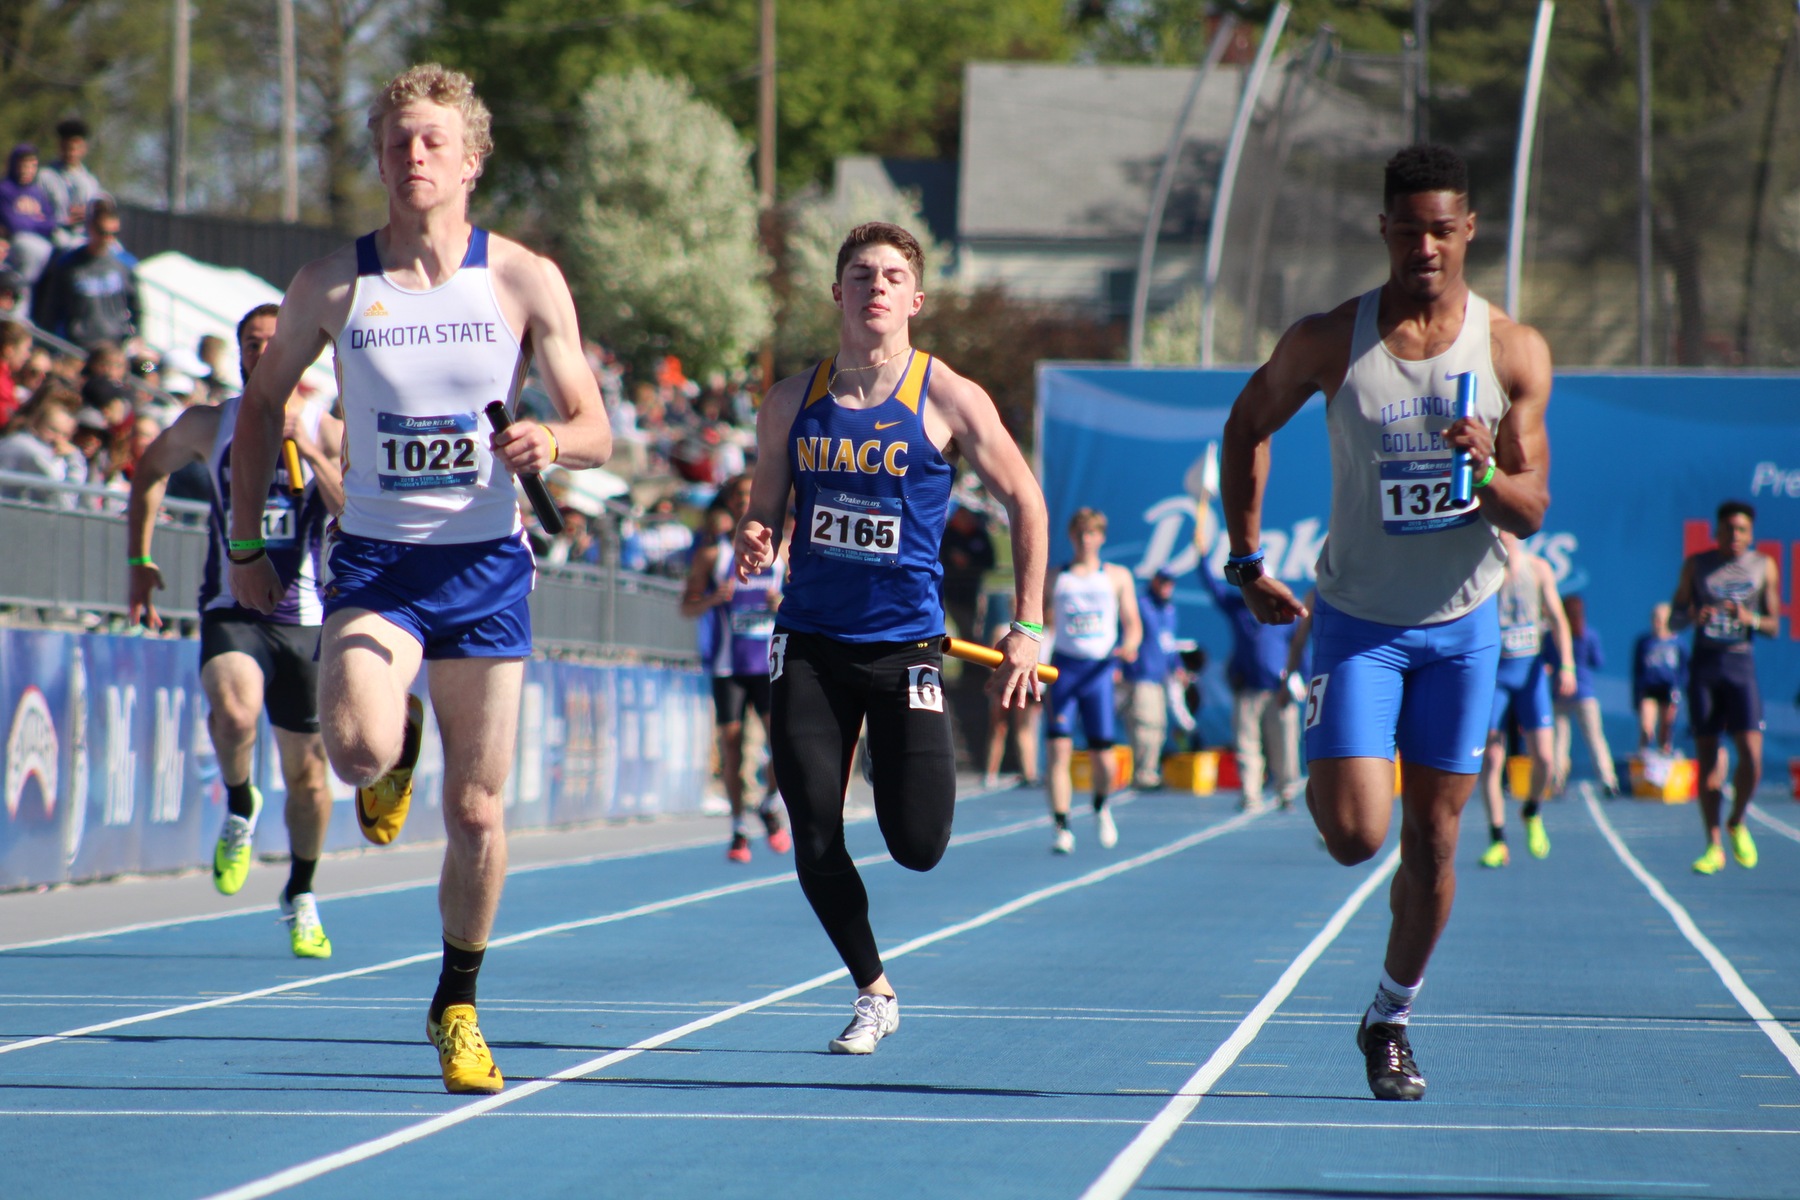 NIACC's Brendan Hoy sprints to the finish line at the Drake Relays in the 4x100 college division preliminaries.